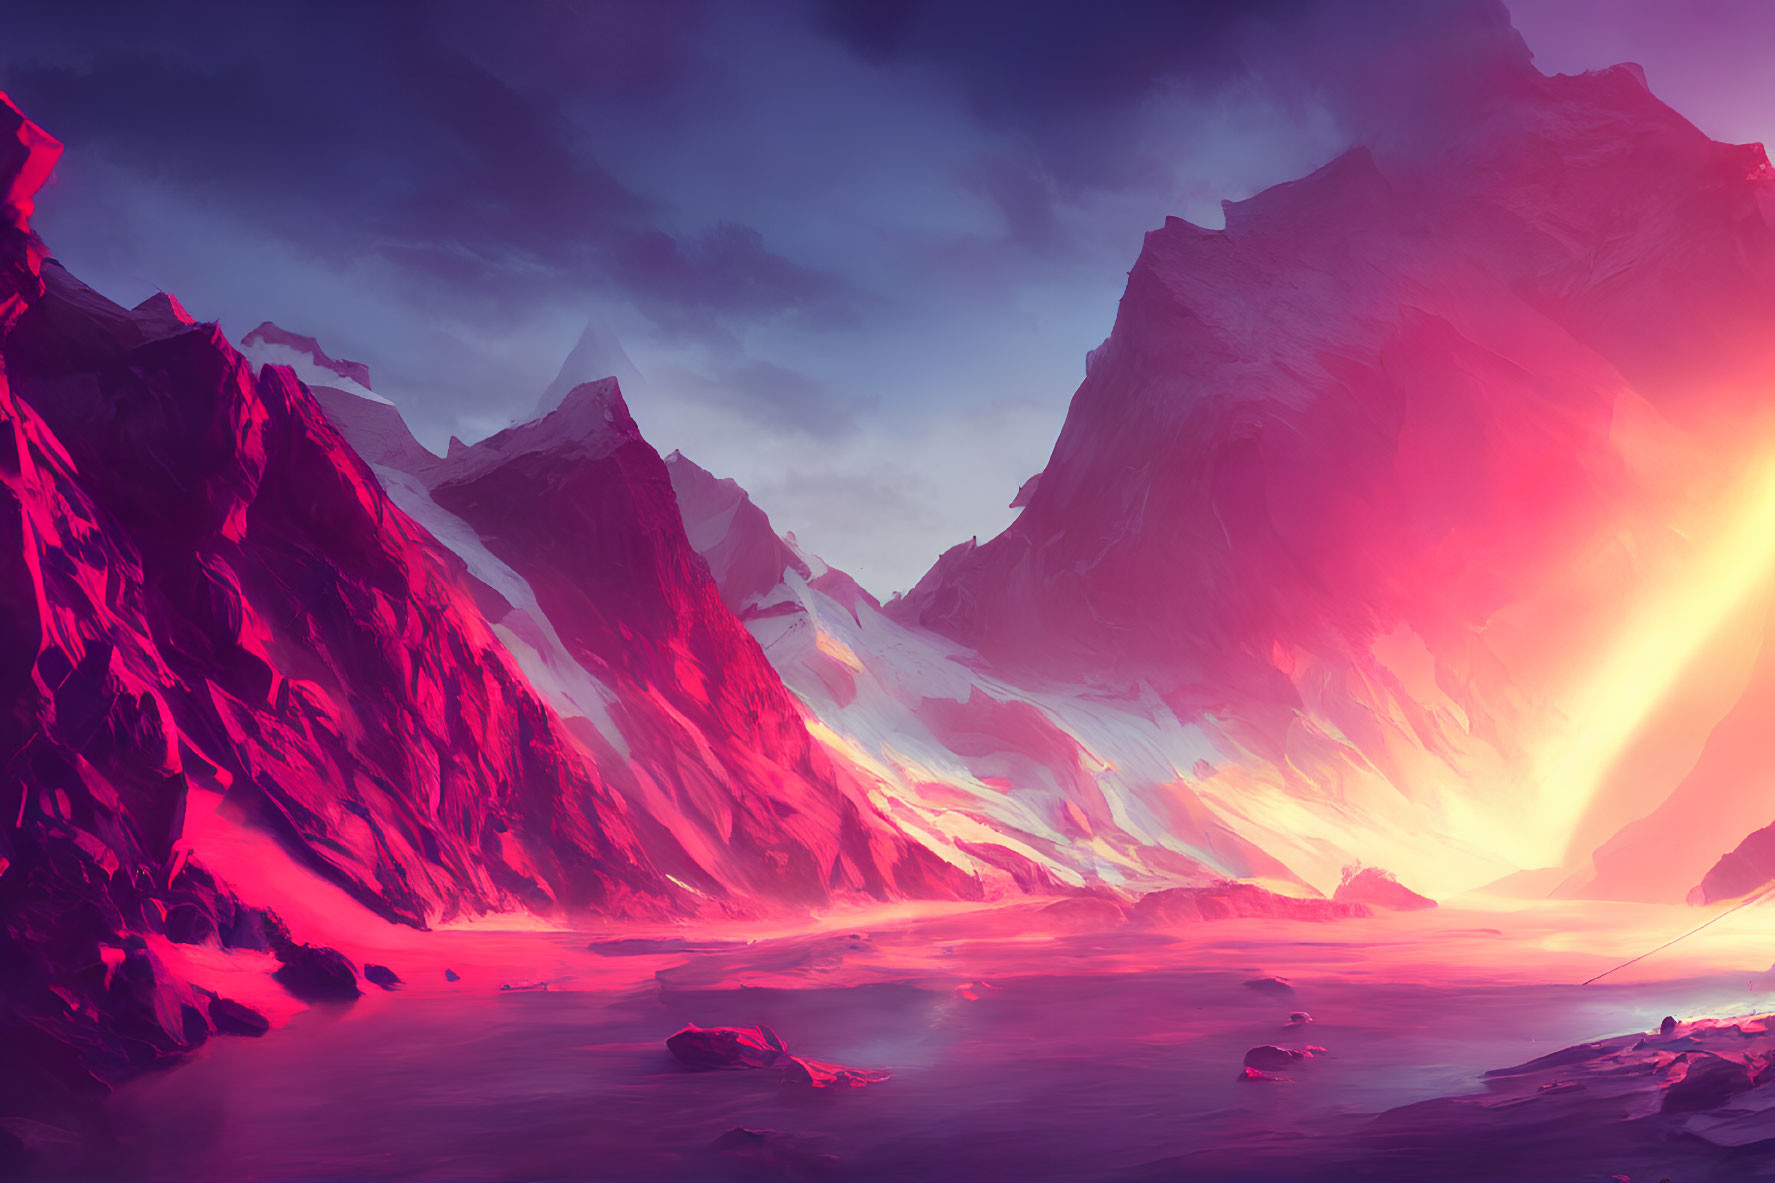 Colorful digital artwork: Mountain landscape in pink and purple hues with radiant sun.